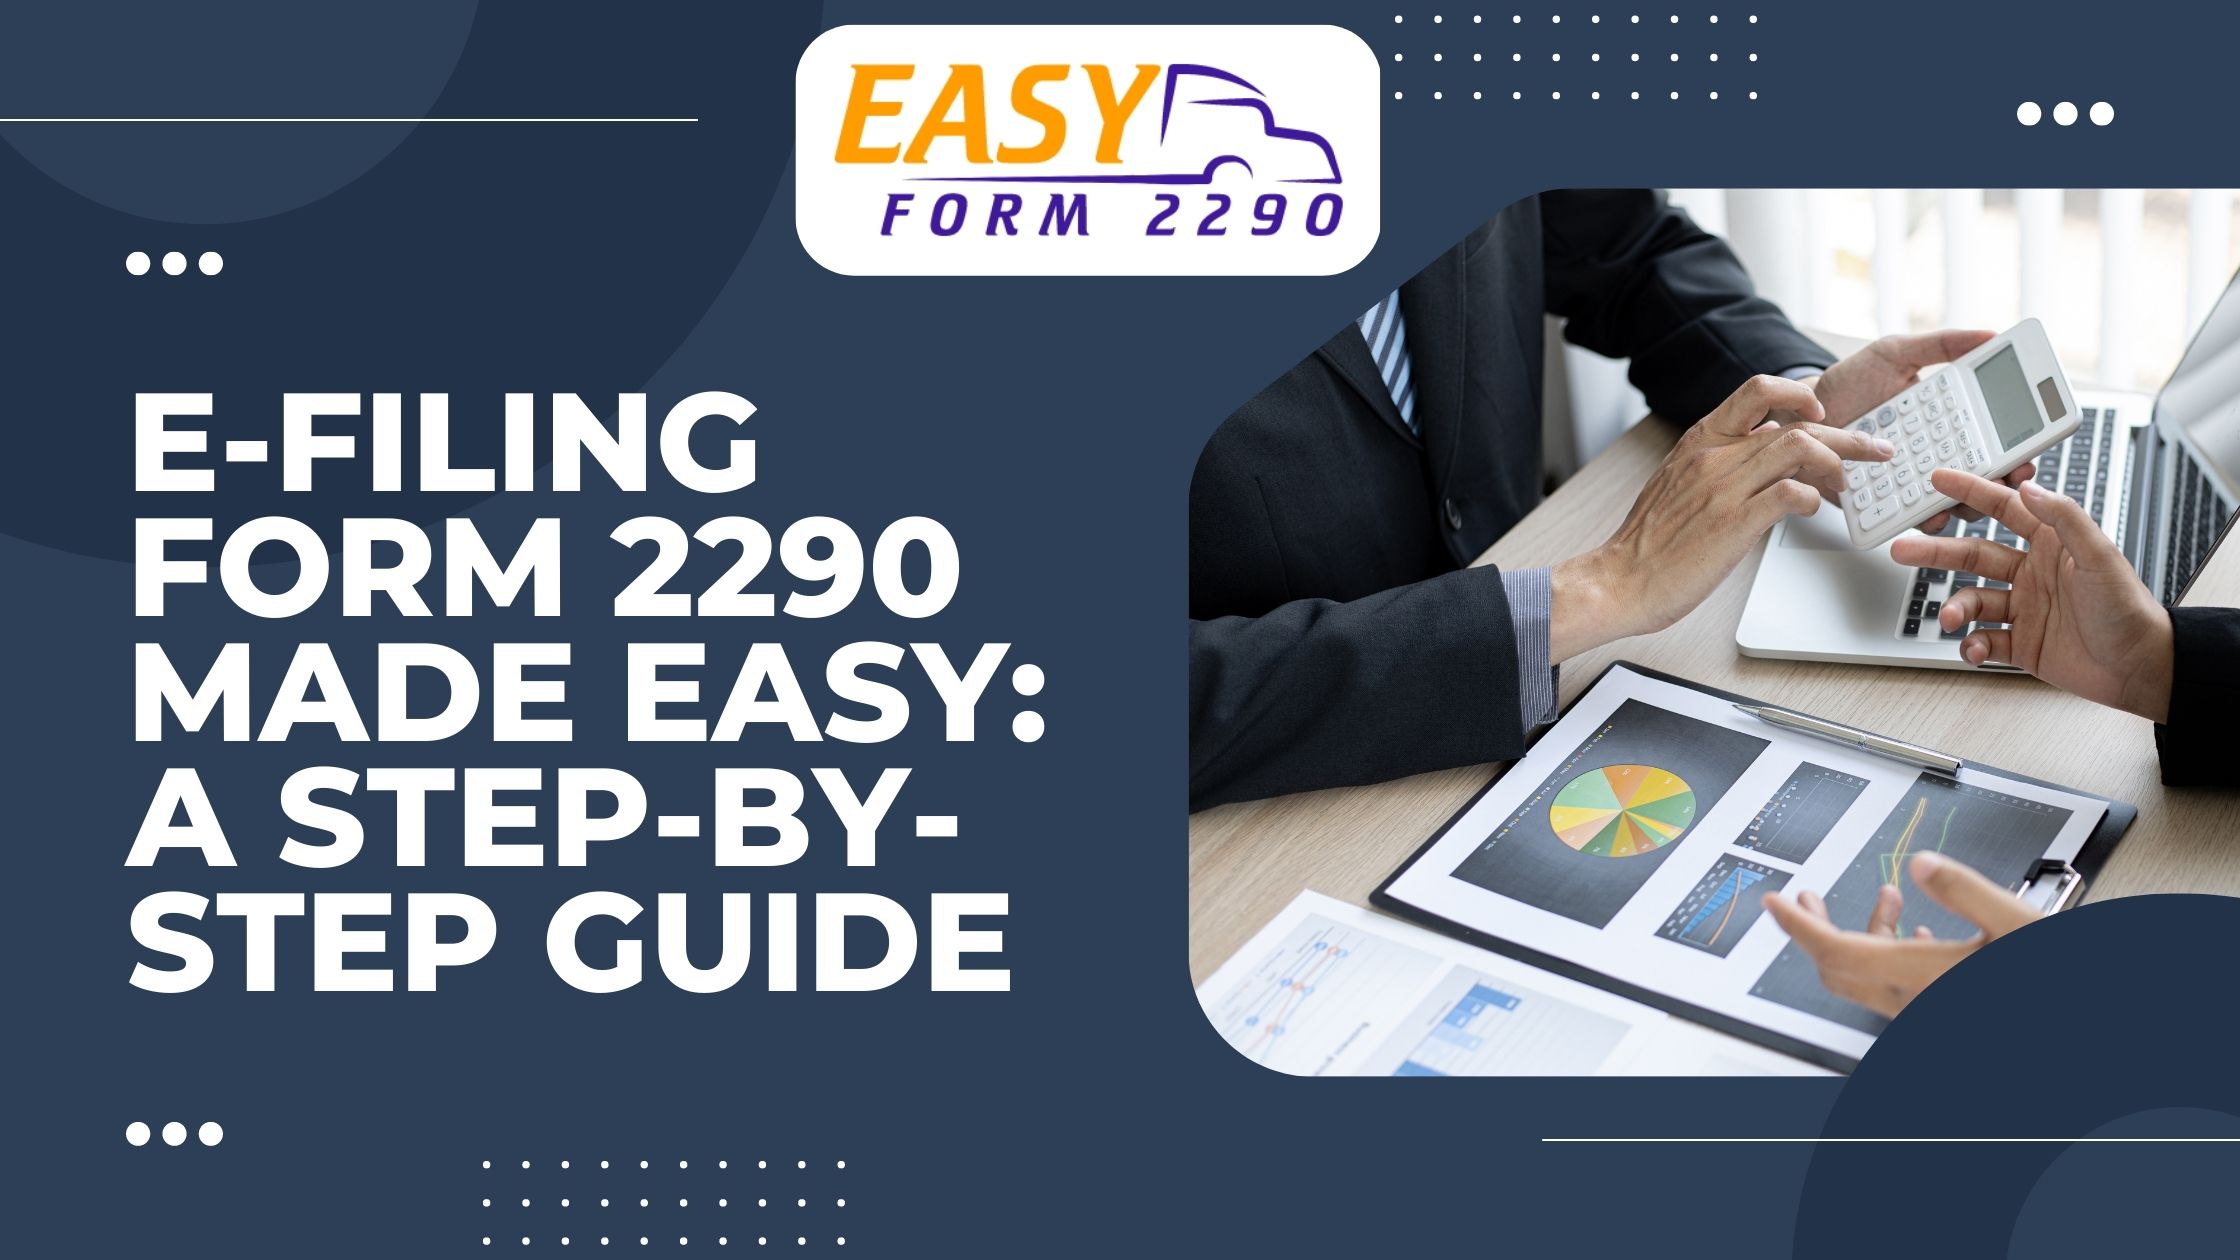 E-FILING FORM 2290 MADE EASY: A STEP-BY-STEP GUIDE